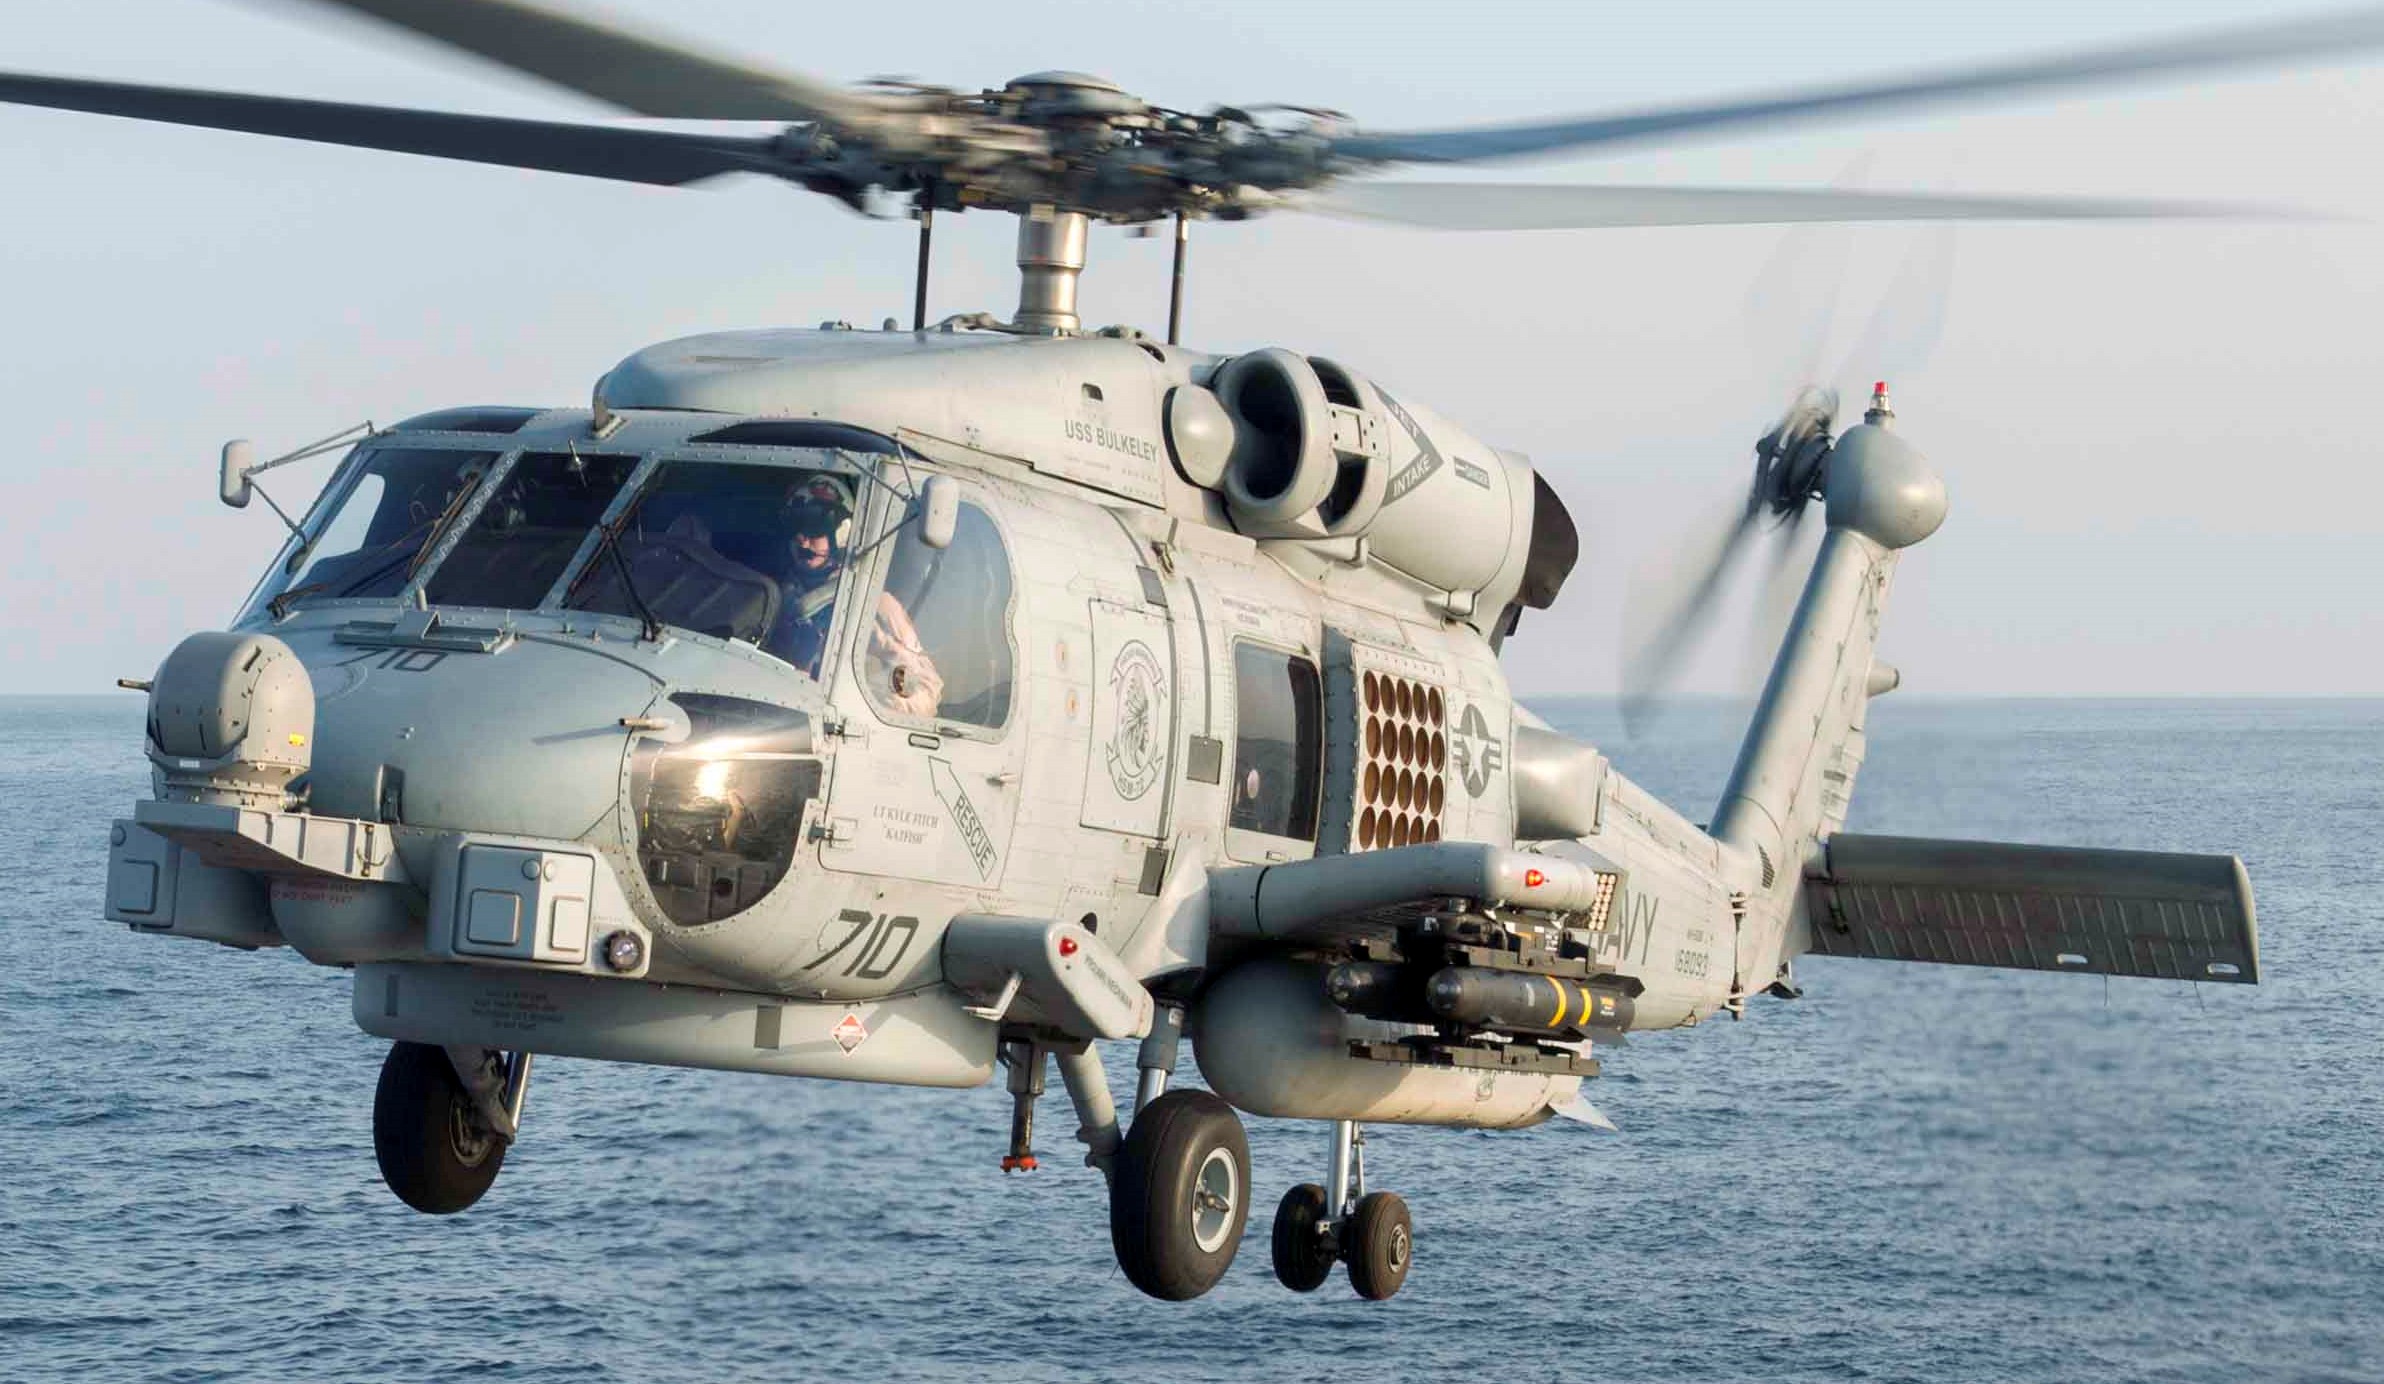 hsm-72 proud warriors helicopter maritime strike squadron mh-60r seahawk carrier air wing cvw-7 uss bulkeley ddg-84 08